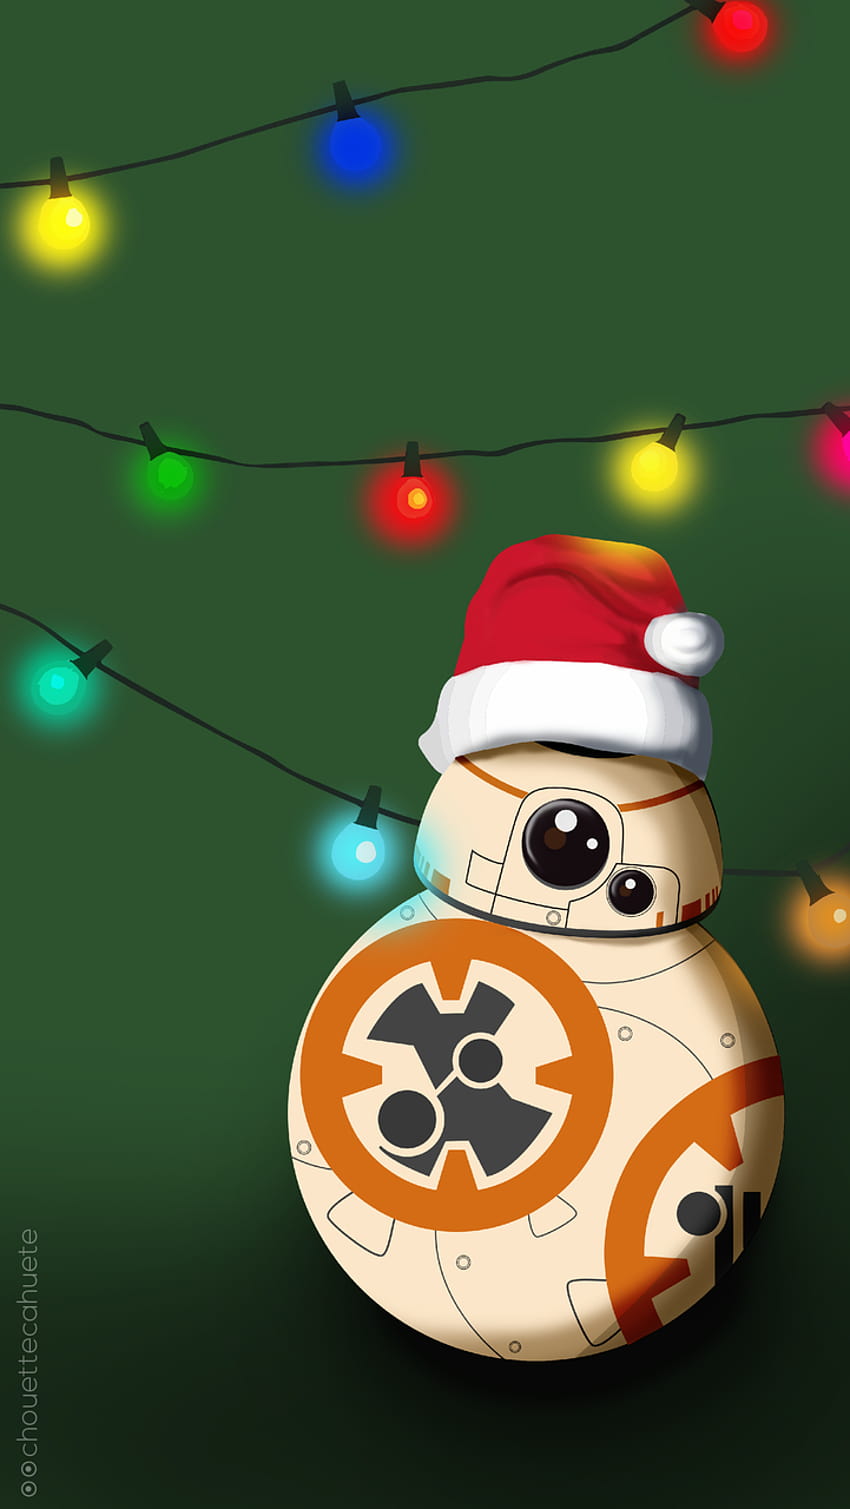 Art star wars christmas background movie HD wallpapers Backgrounds   Wallpapers